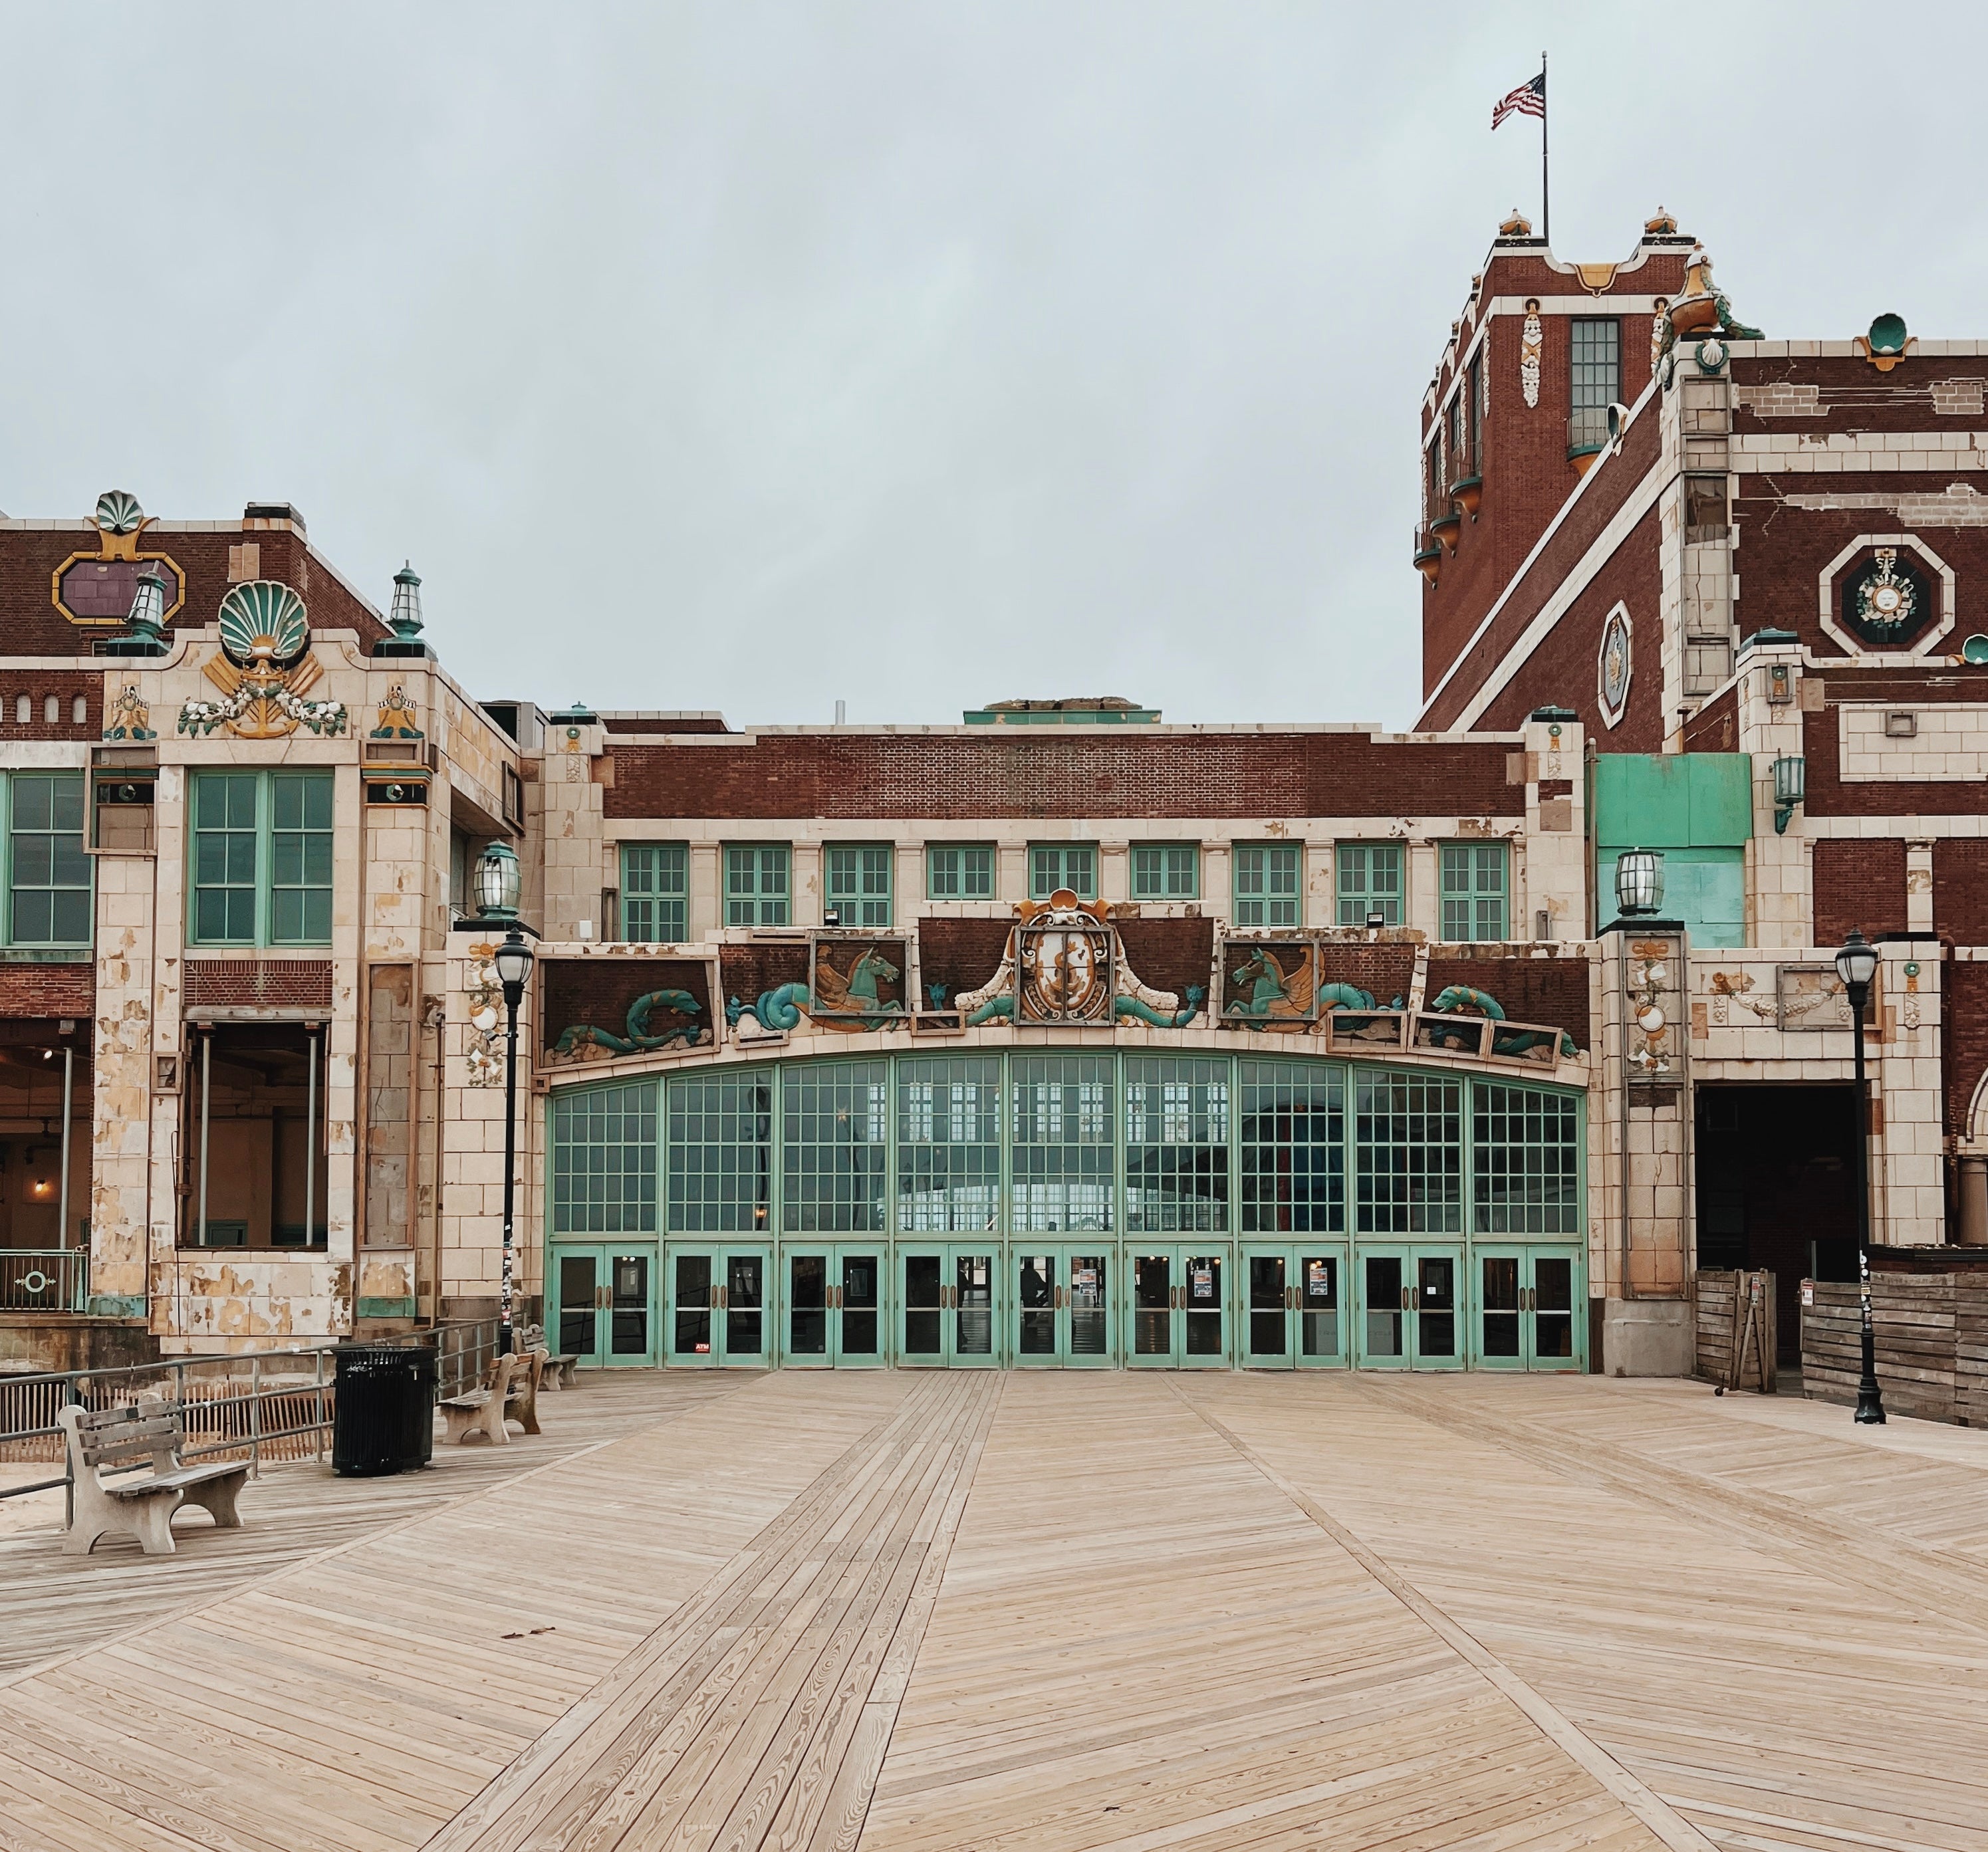 The iconic Paramount Theatre sits on a nostalgic boardwalk in Asbury Park